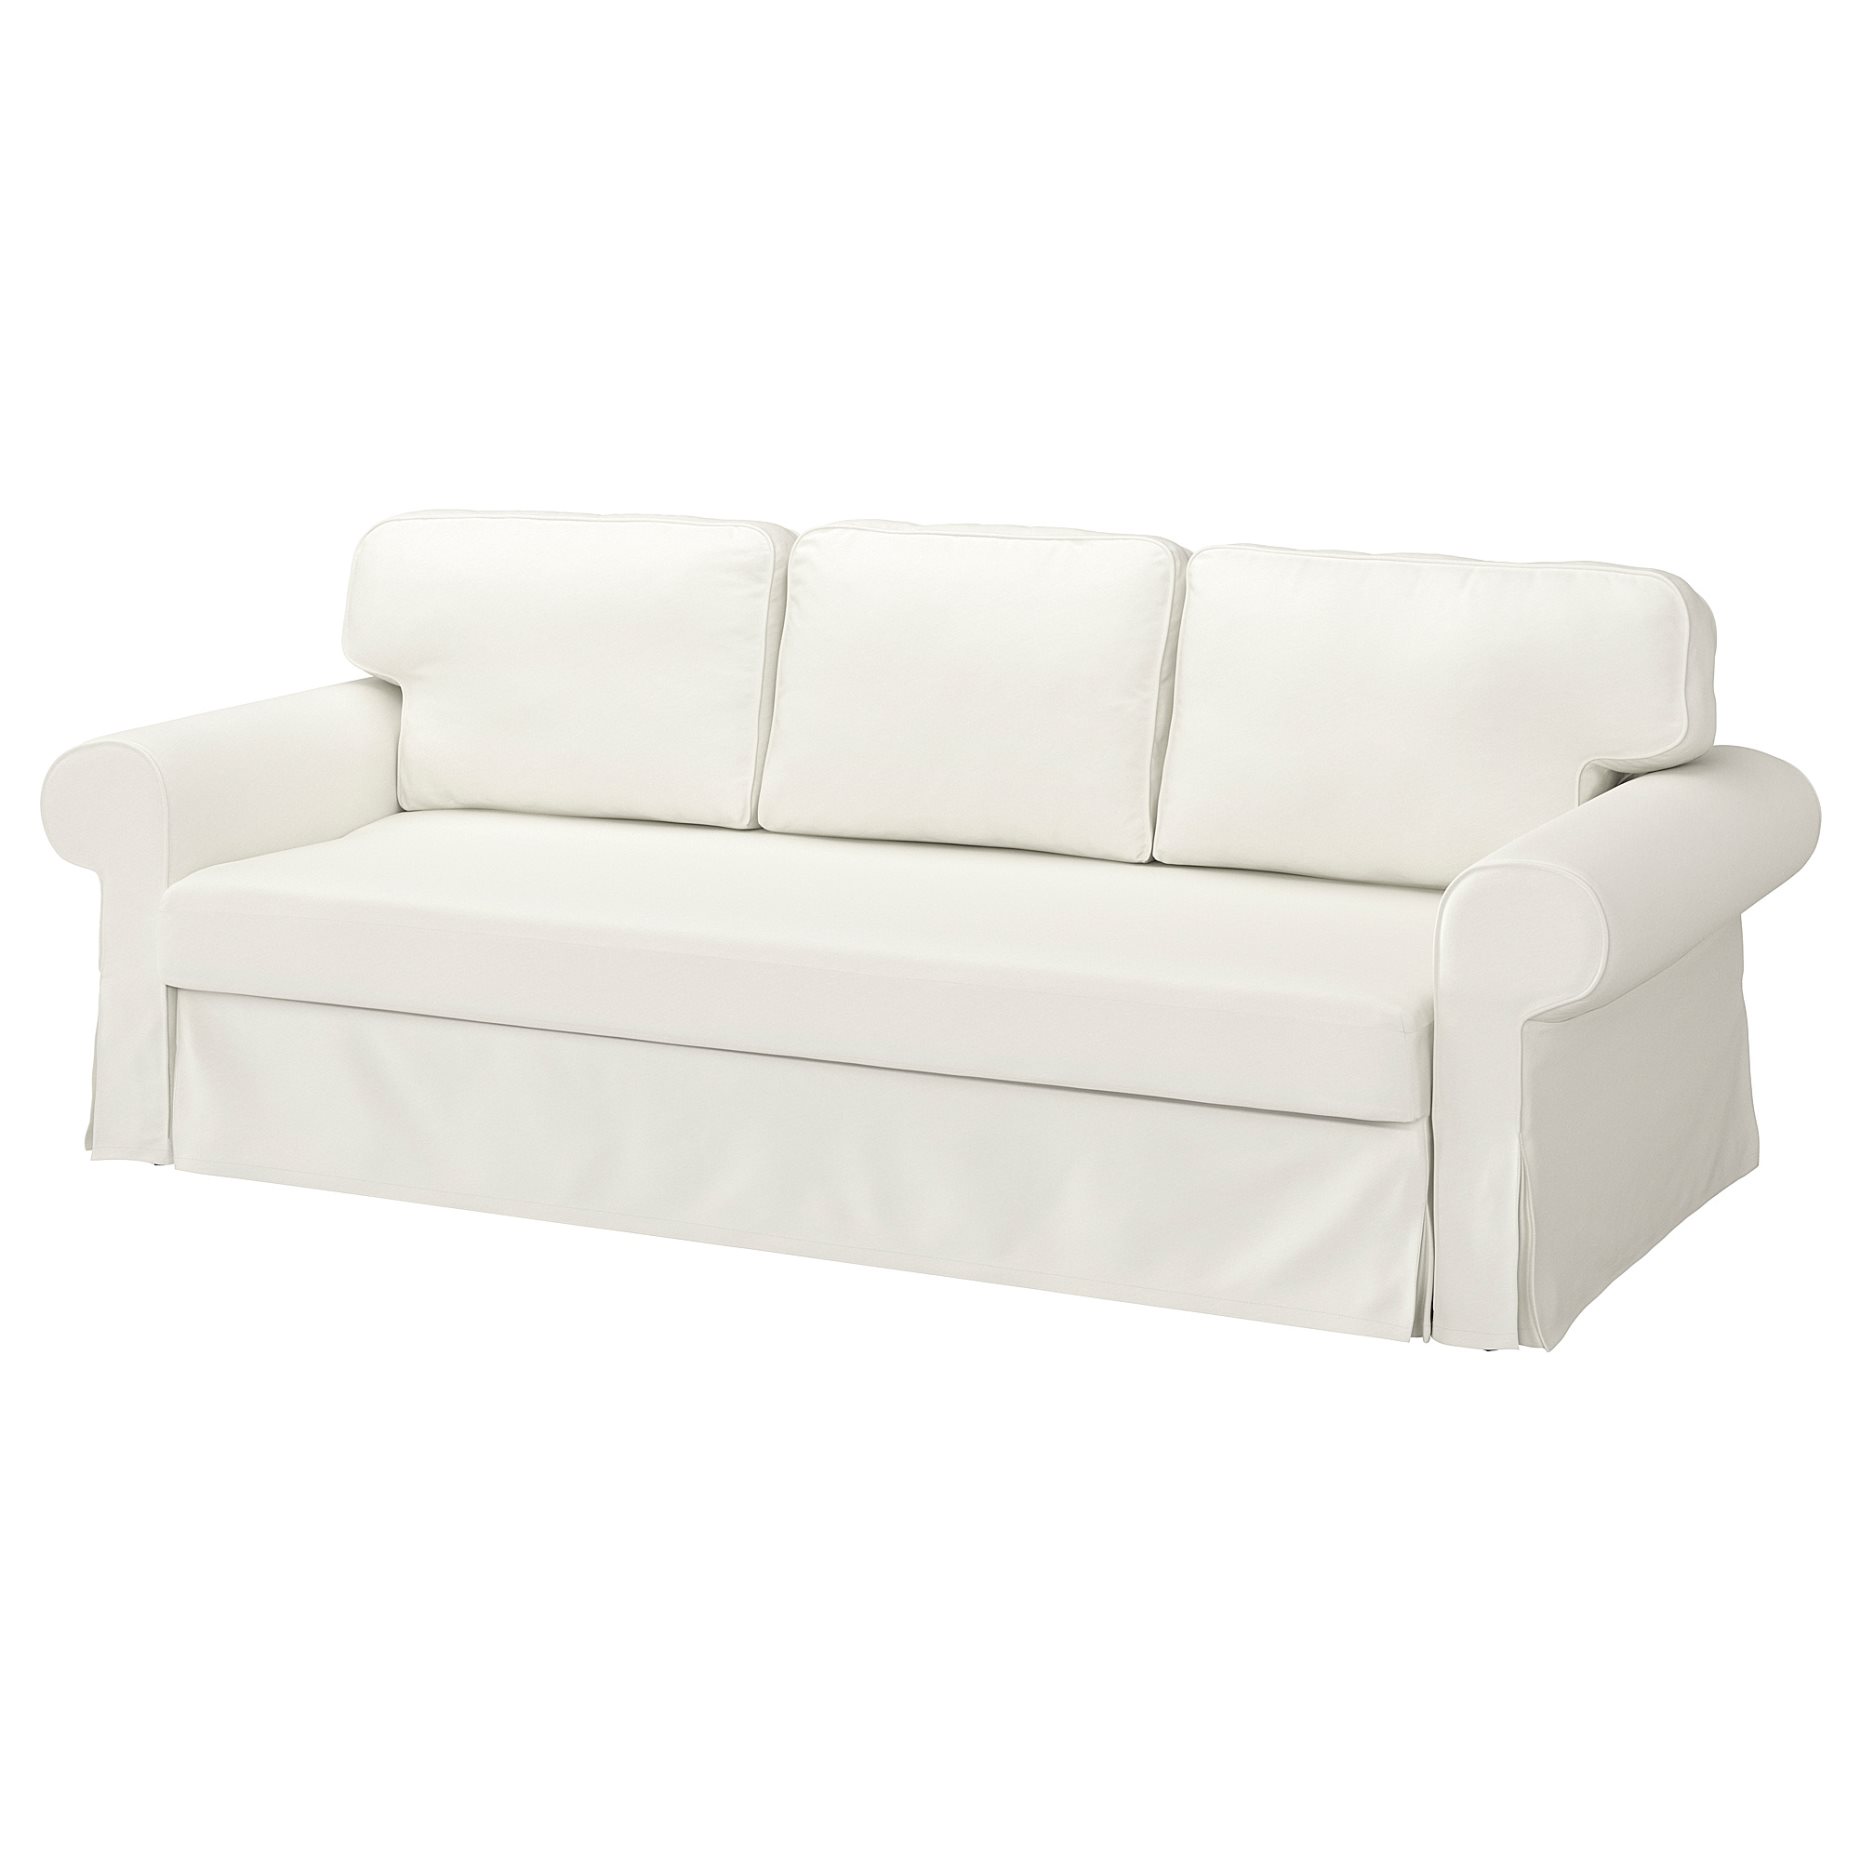 VRETSTORP, cover for 3-seat sofa-bed, 704.803.03